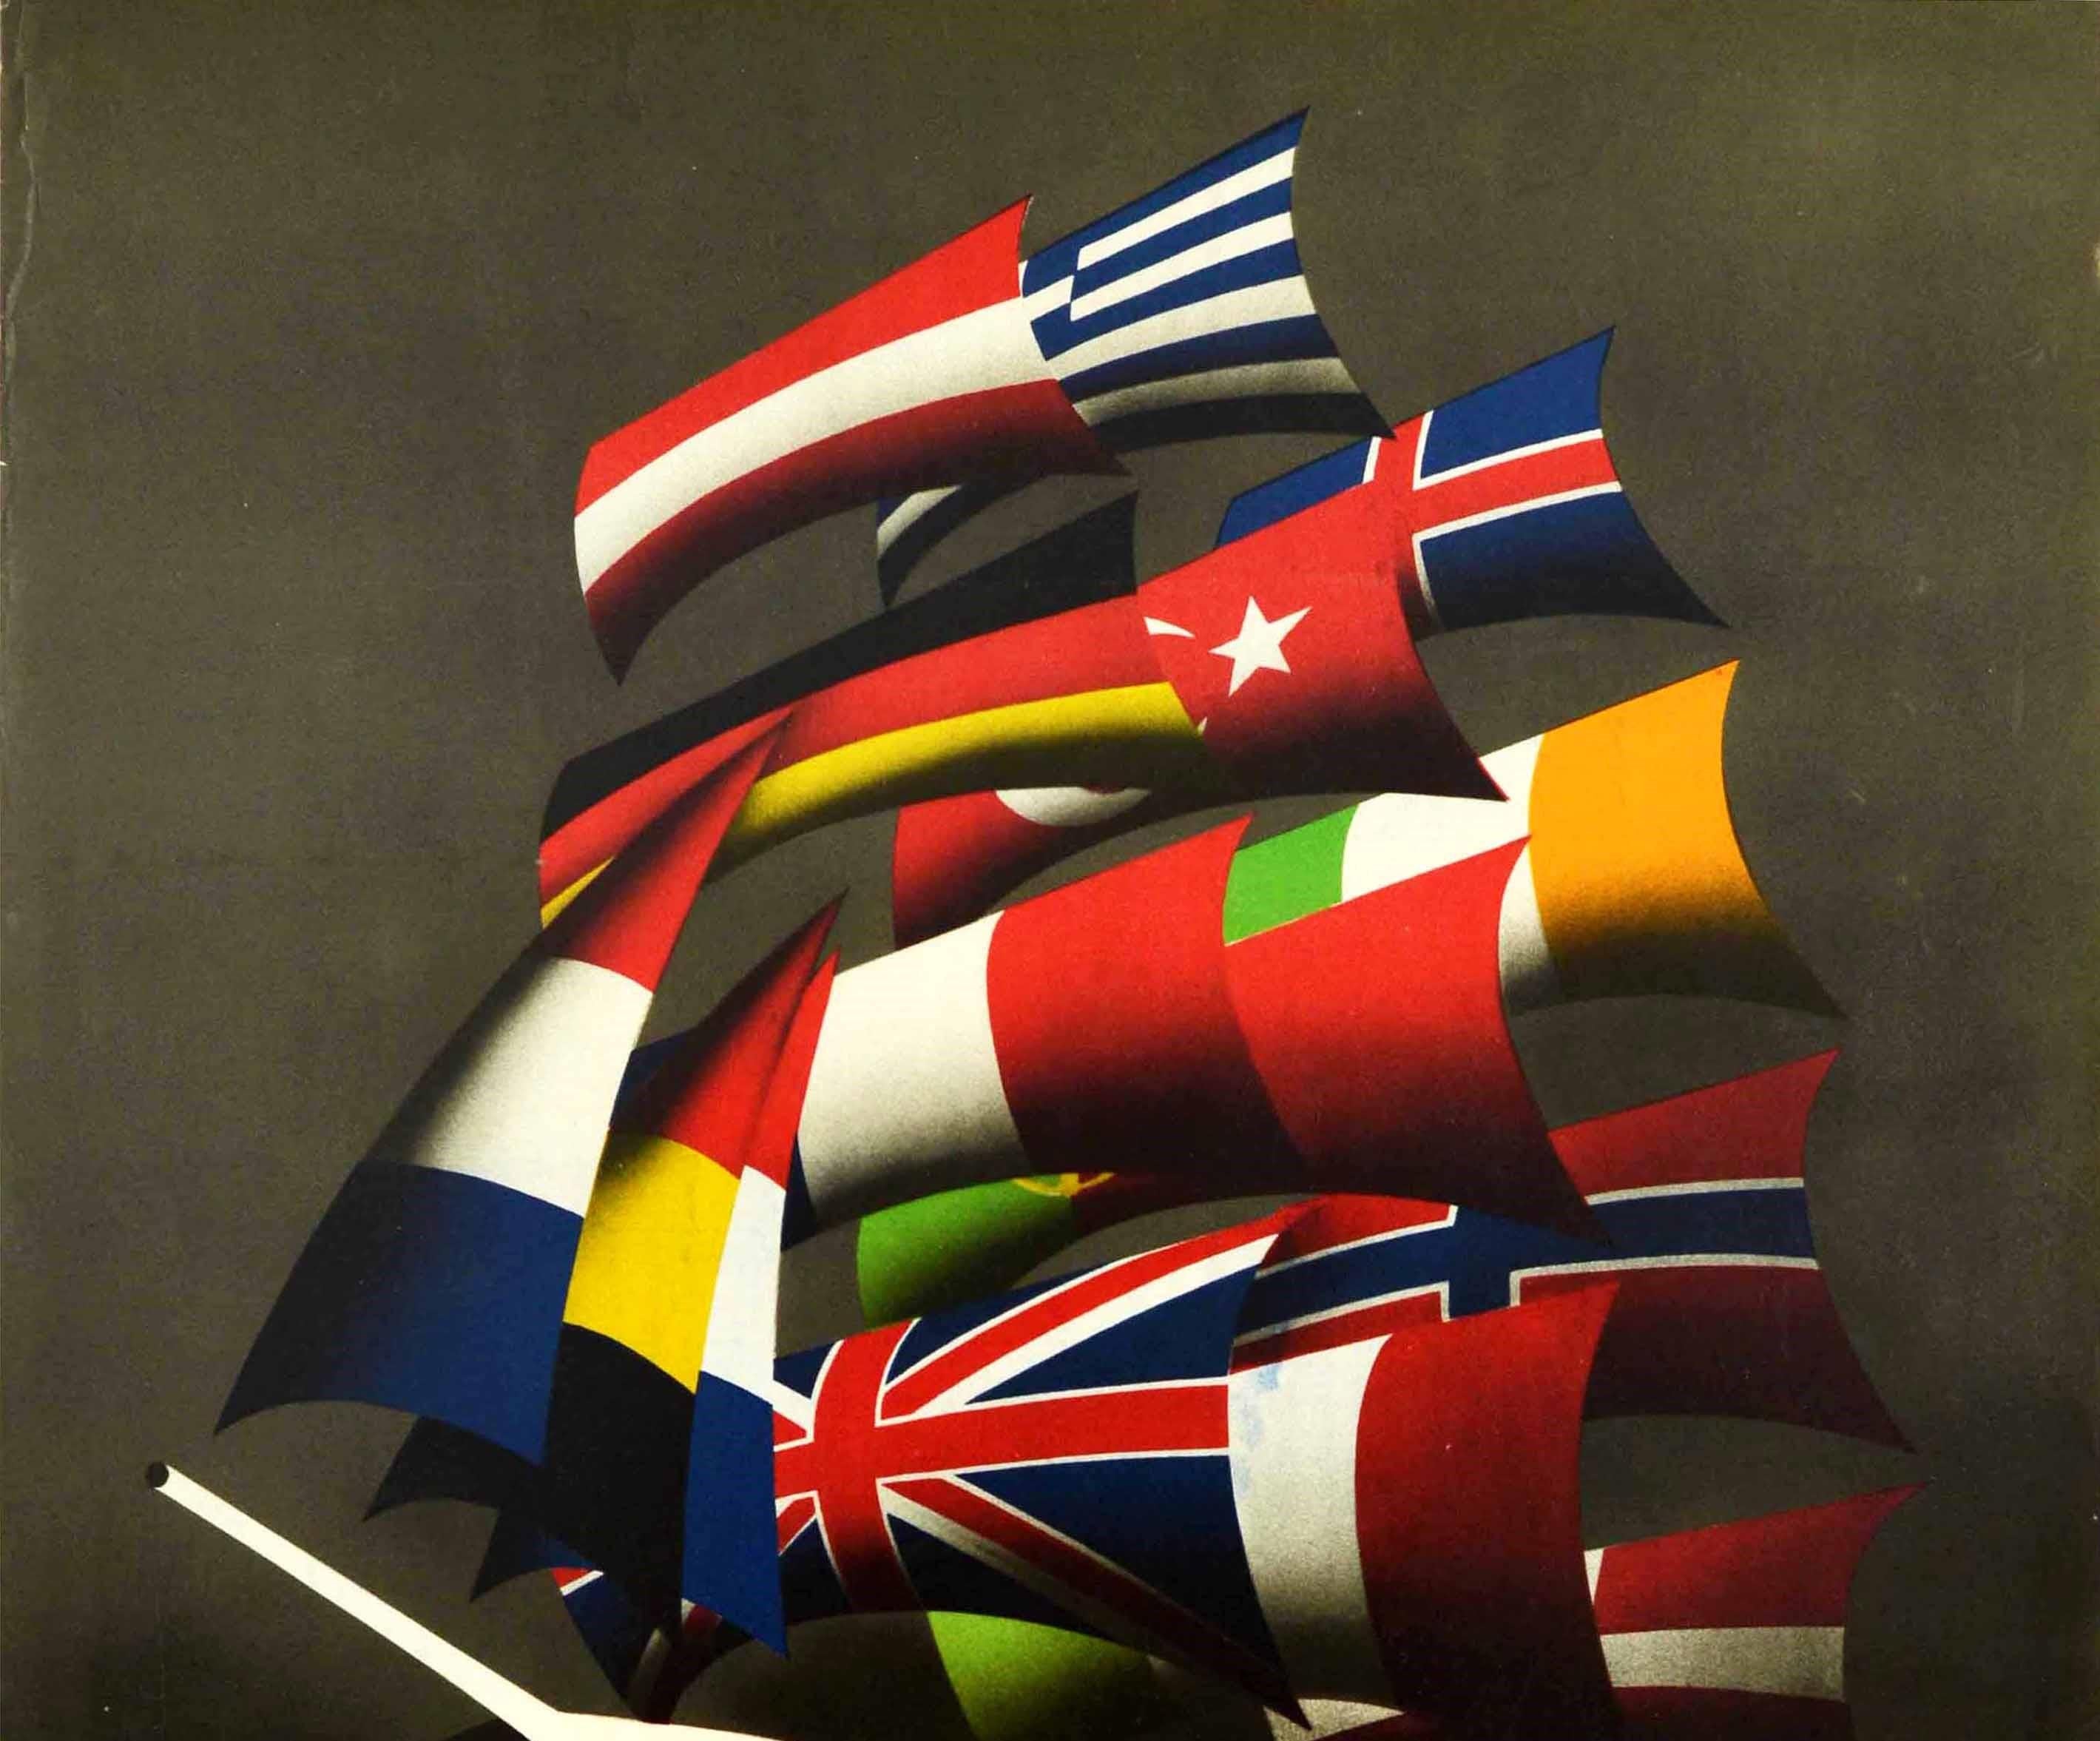 Original vintage propaganda poster for the post-war US sponsored ERP European Recovery Program (1948) known as the Marshall Plan - Europe All our Colours to the Mast - featuring a fantastic nautical design by Reyn Dirksen (1924-1999) depicting a